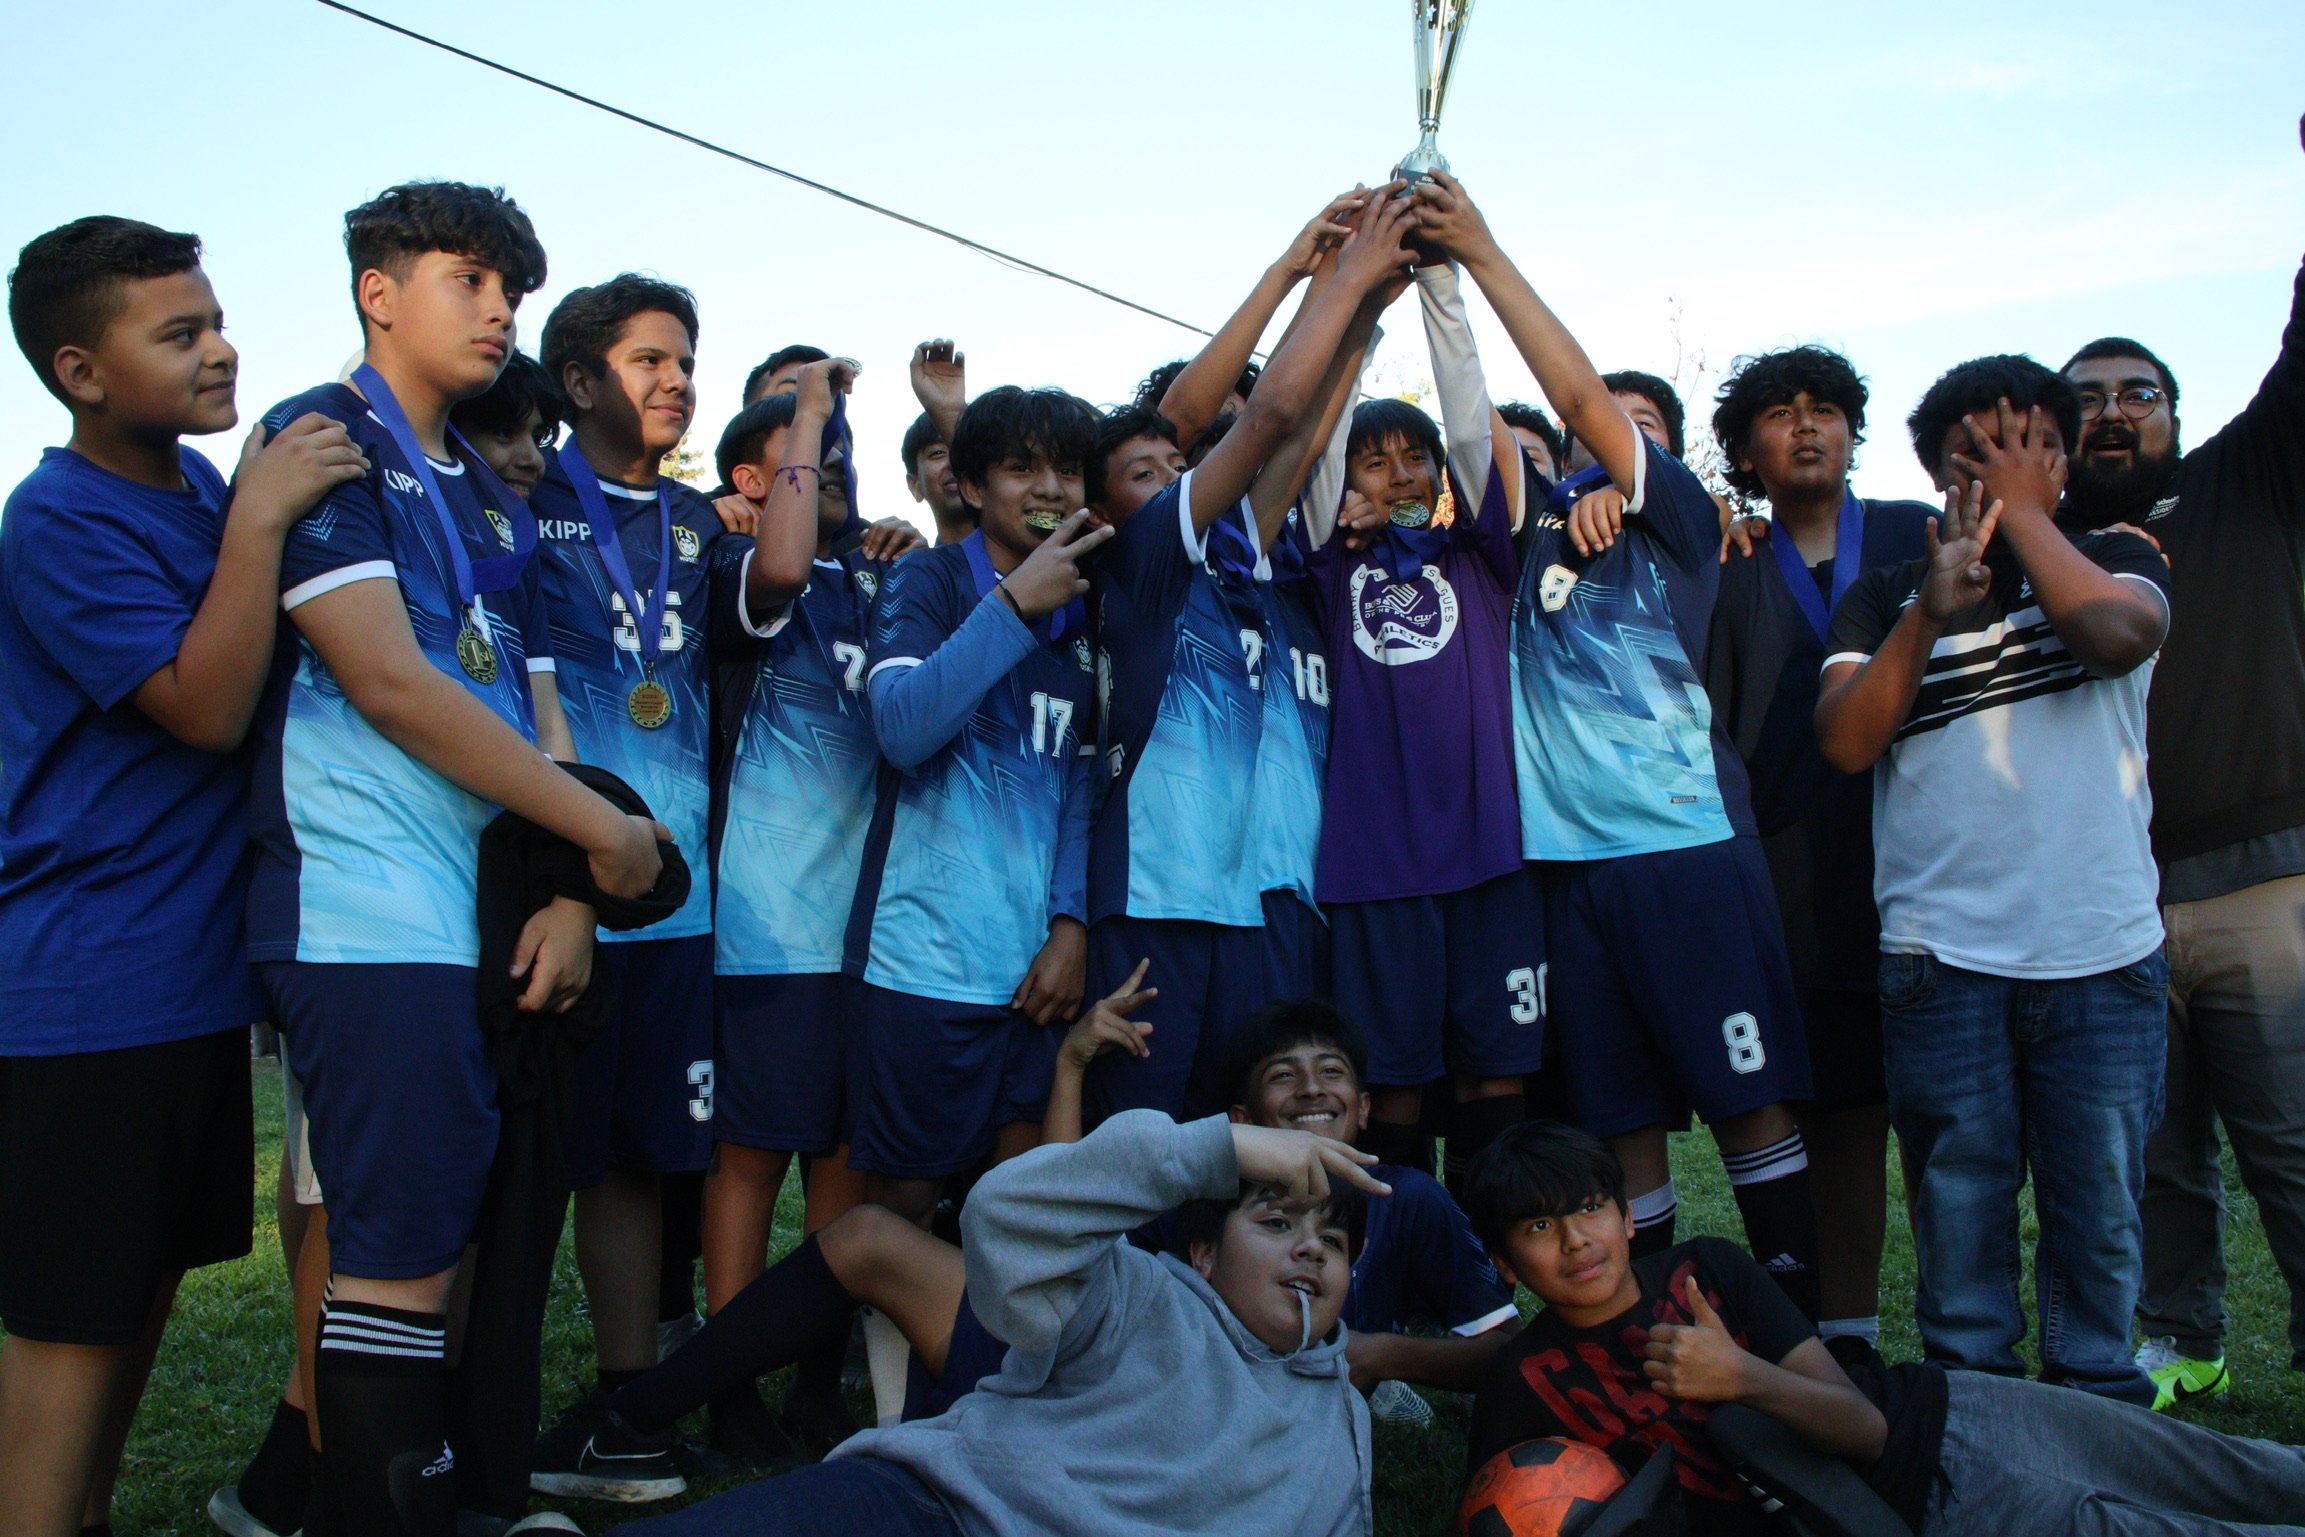 Middle School Soccer Championship (11/3)